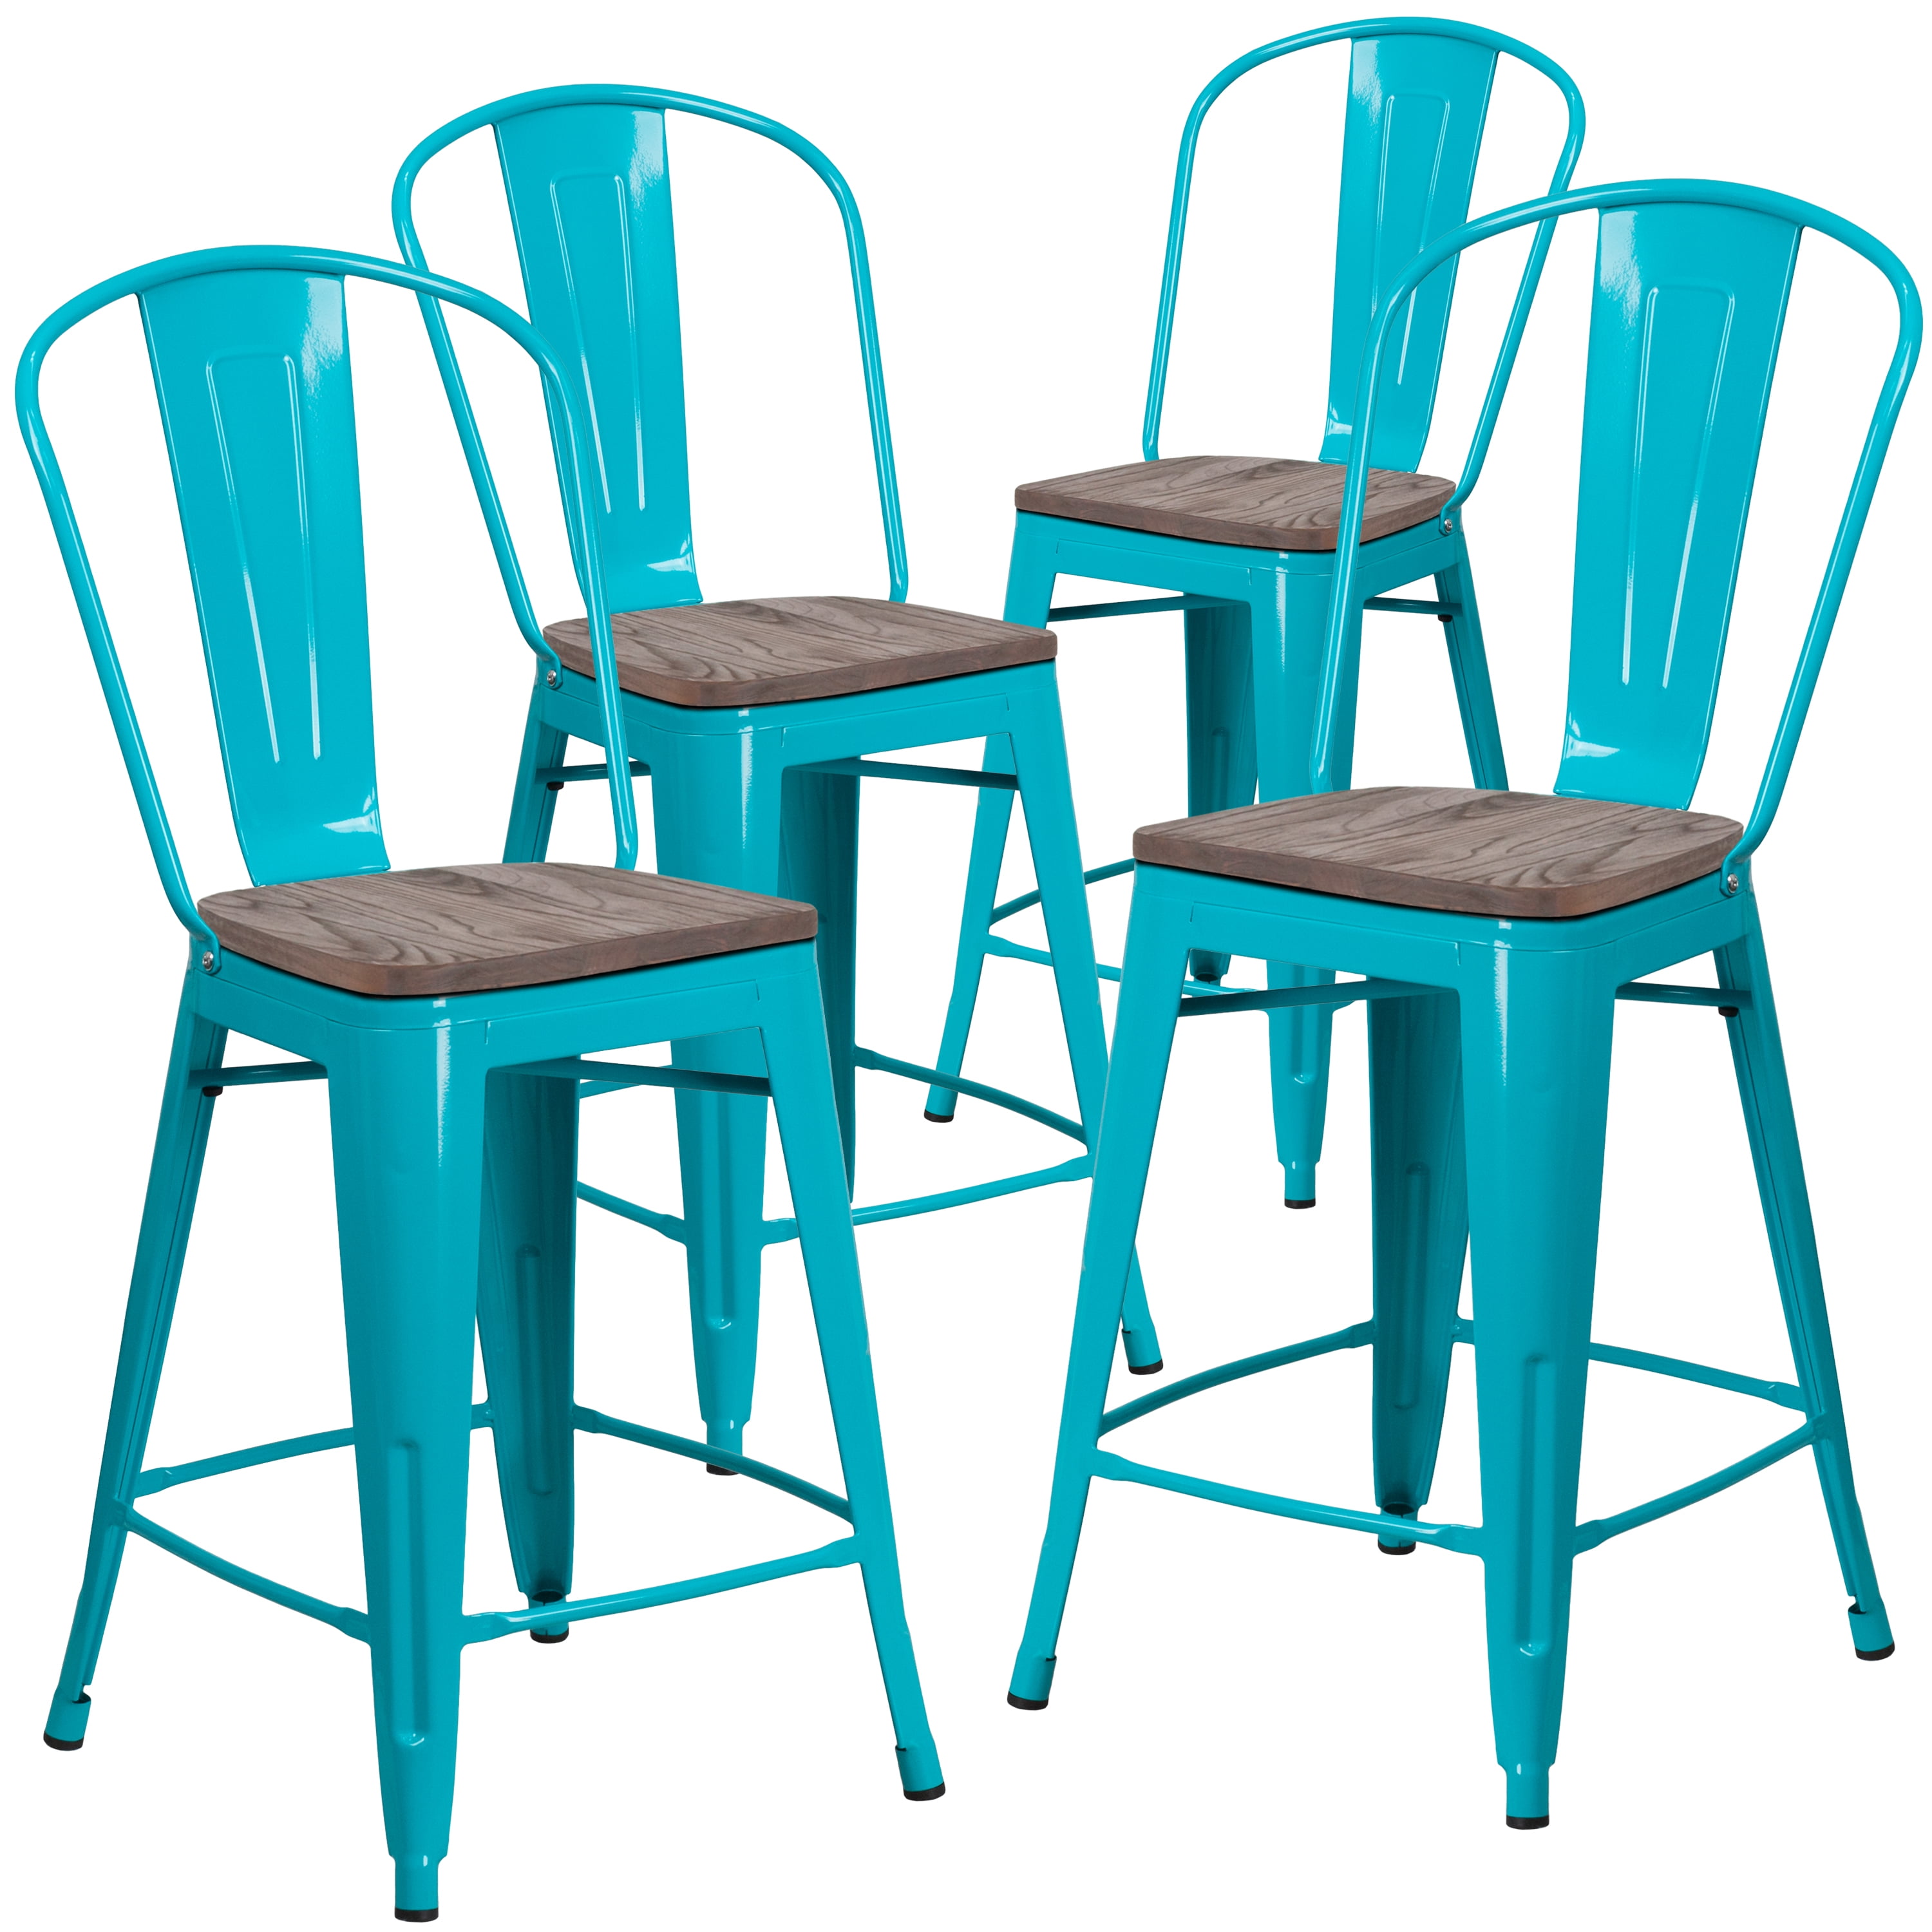 4 Pack 24 High Crystal Teal Blue Metal, Metal And Wood Counter Height Stools With Backs